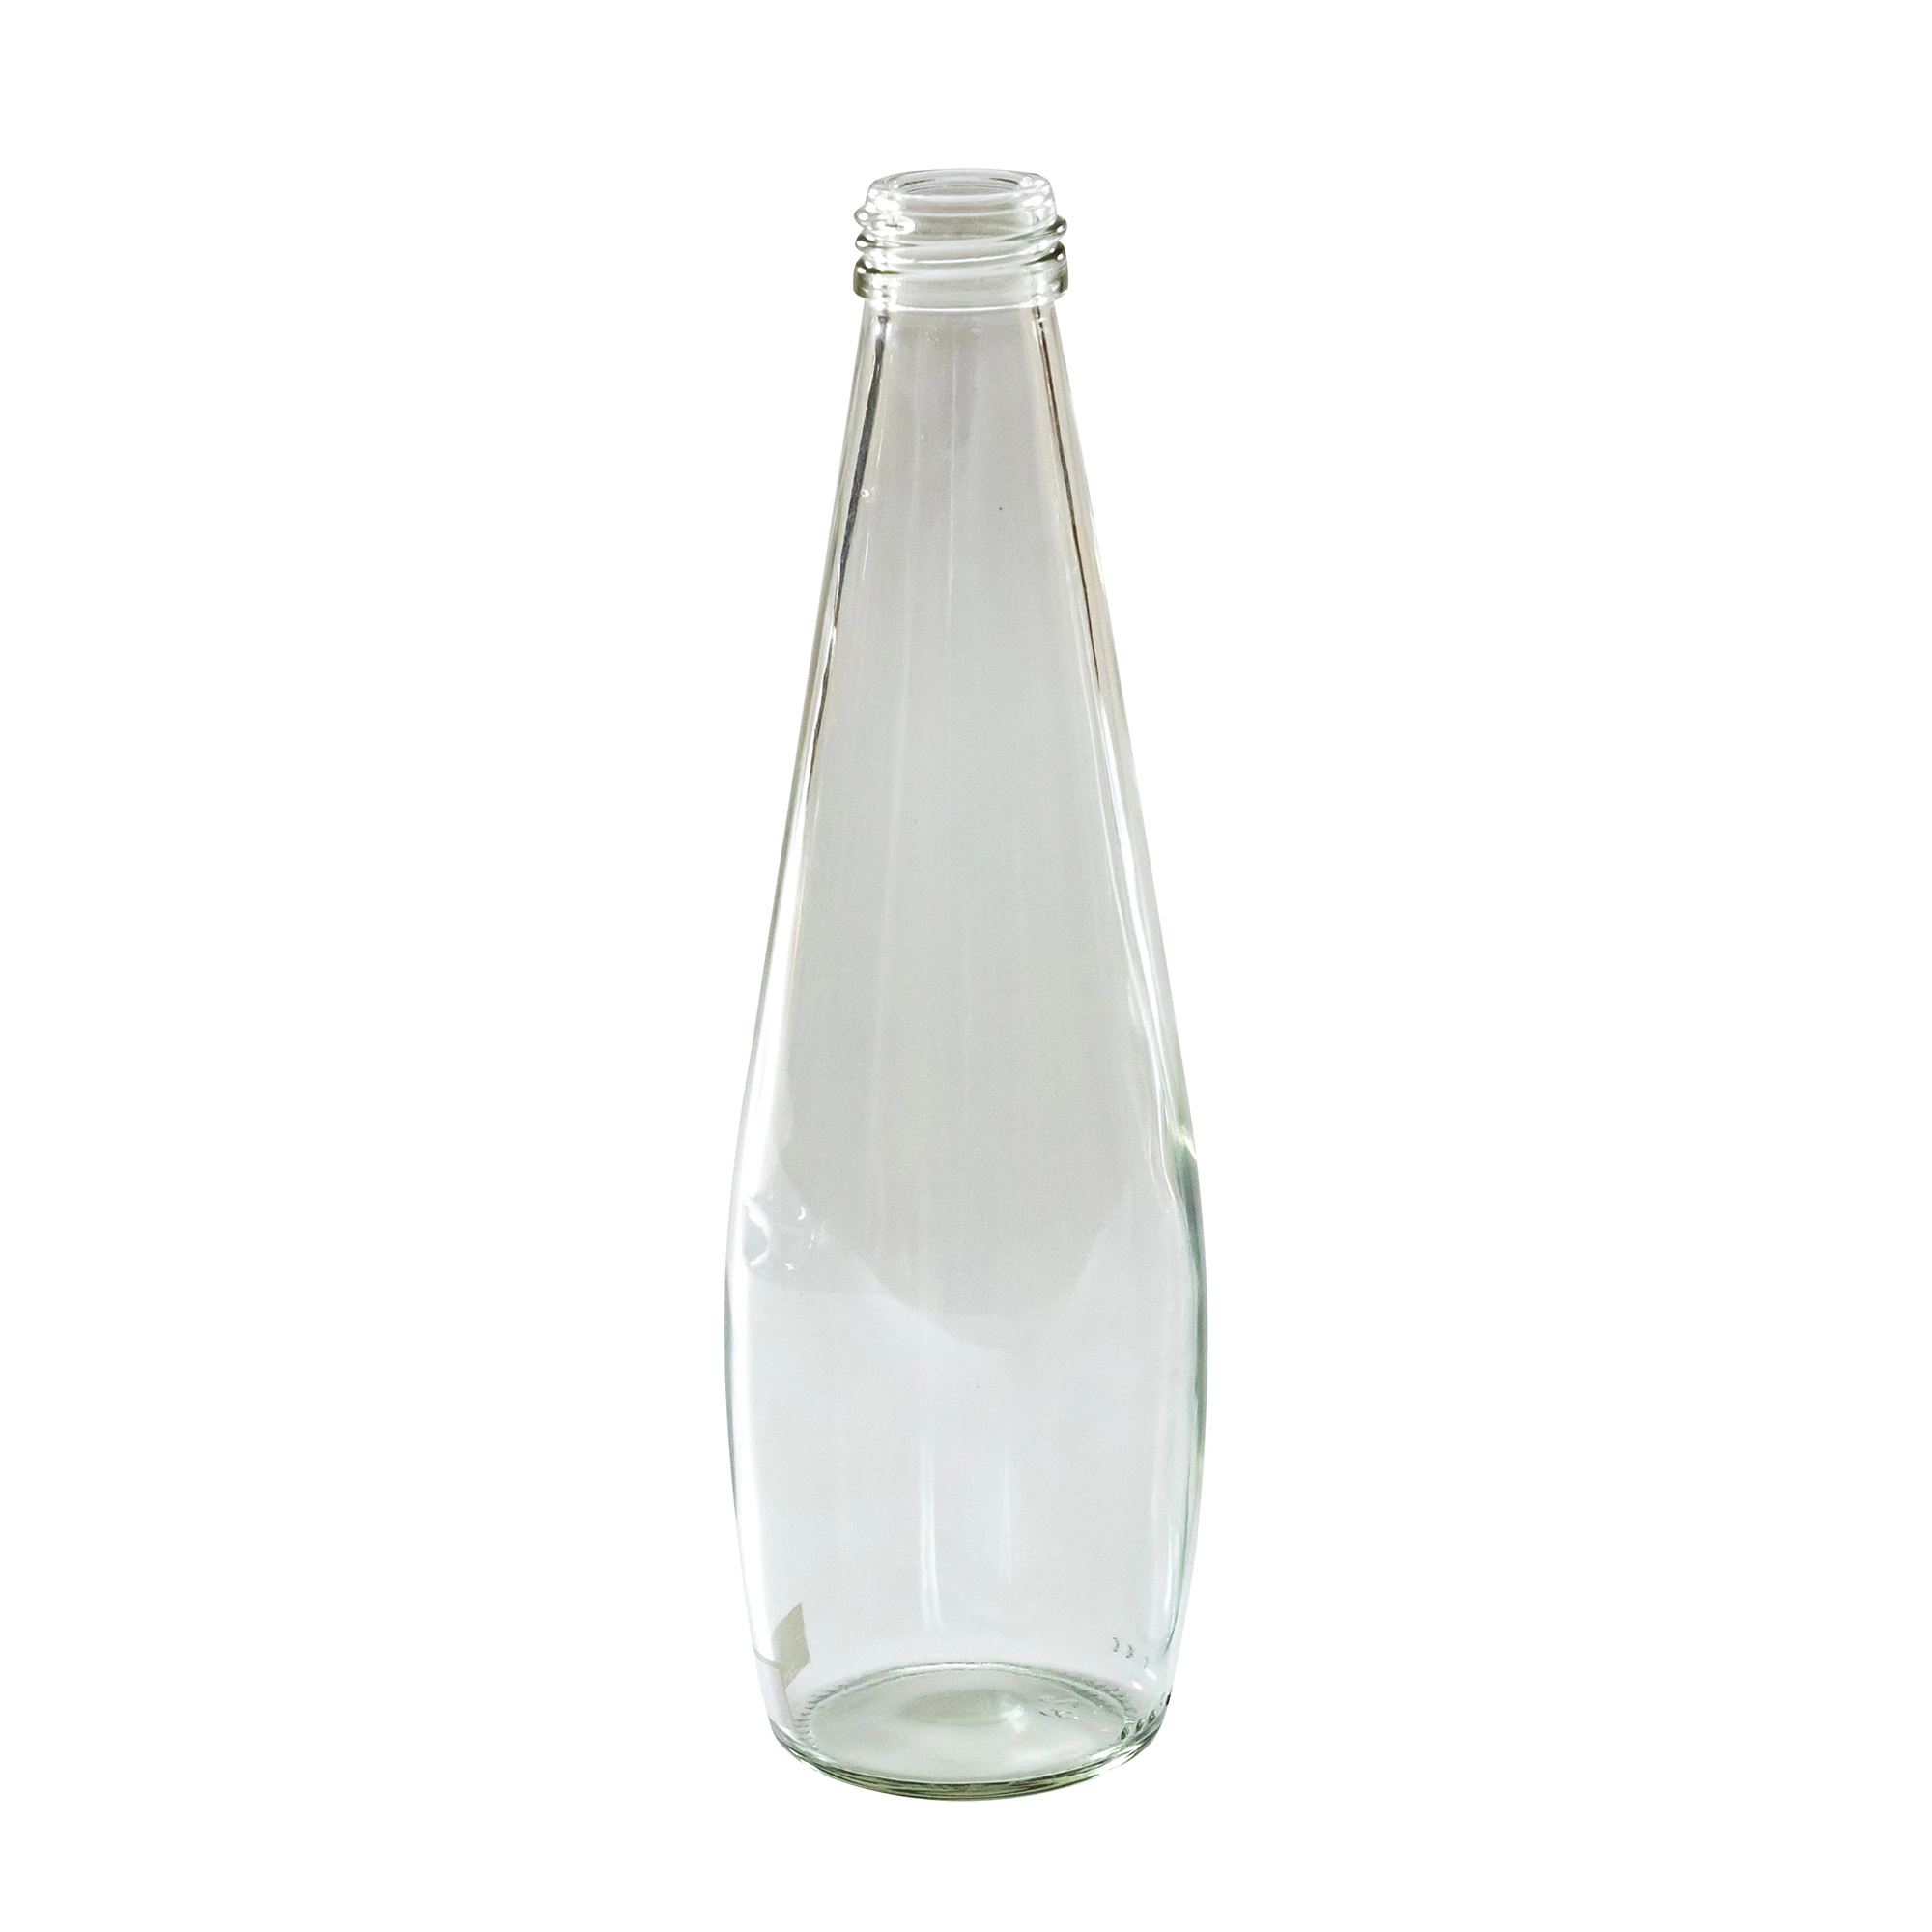 300ml Clear Colored Frosted or Decal Logo Glass Bottle with Screw Cap Beverage Mineral Water Juice Milk Glass Bottles 500ml 300ml 550ml